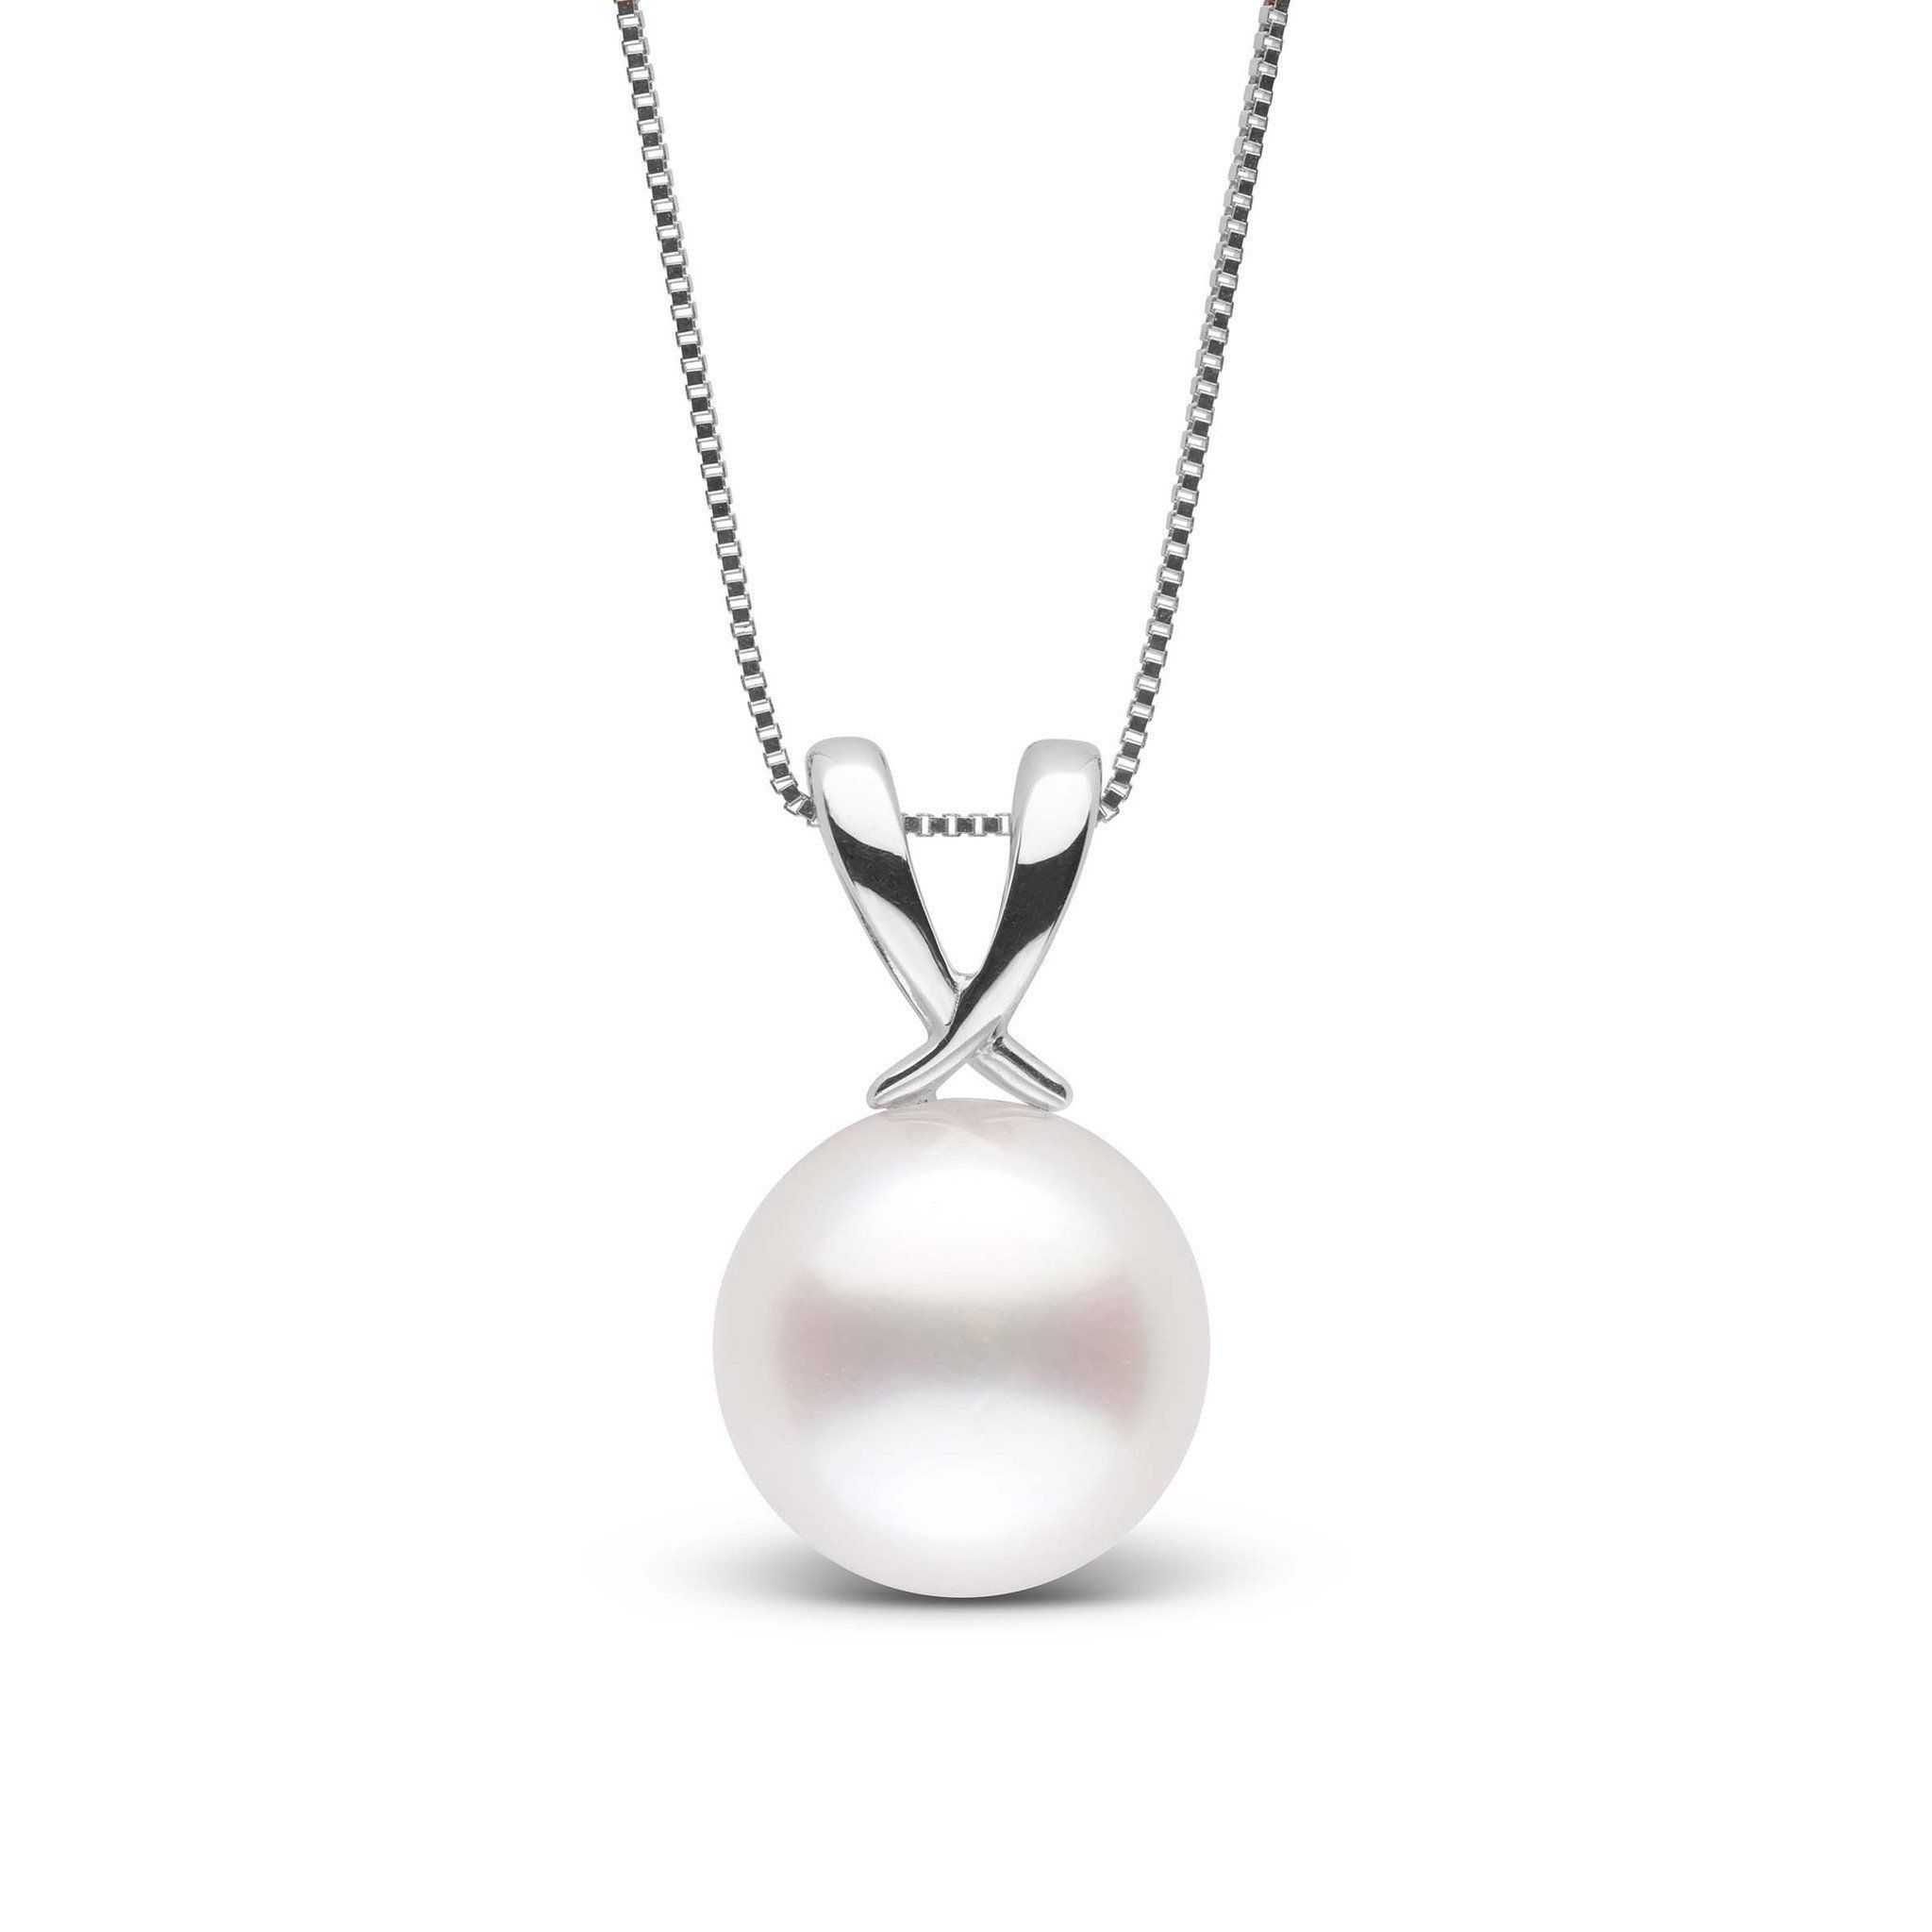 Ribbon Collection 10.0-11.0 mm White South Sea Pearl Pendant